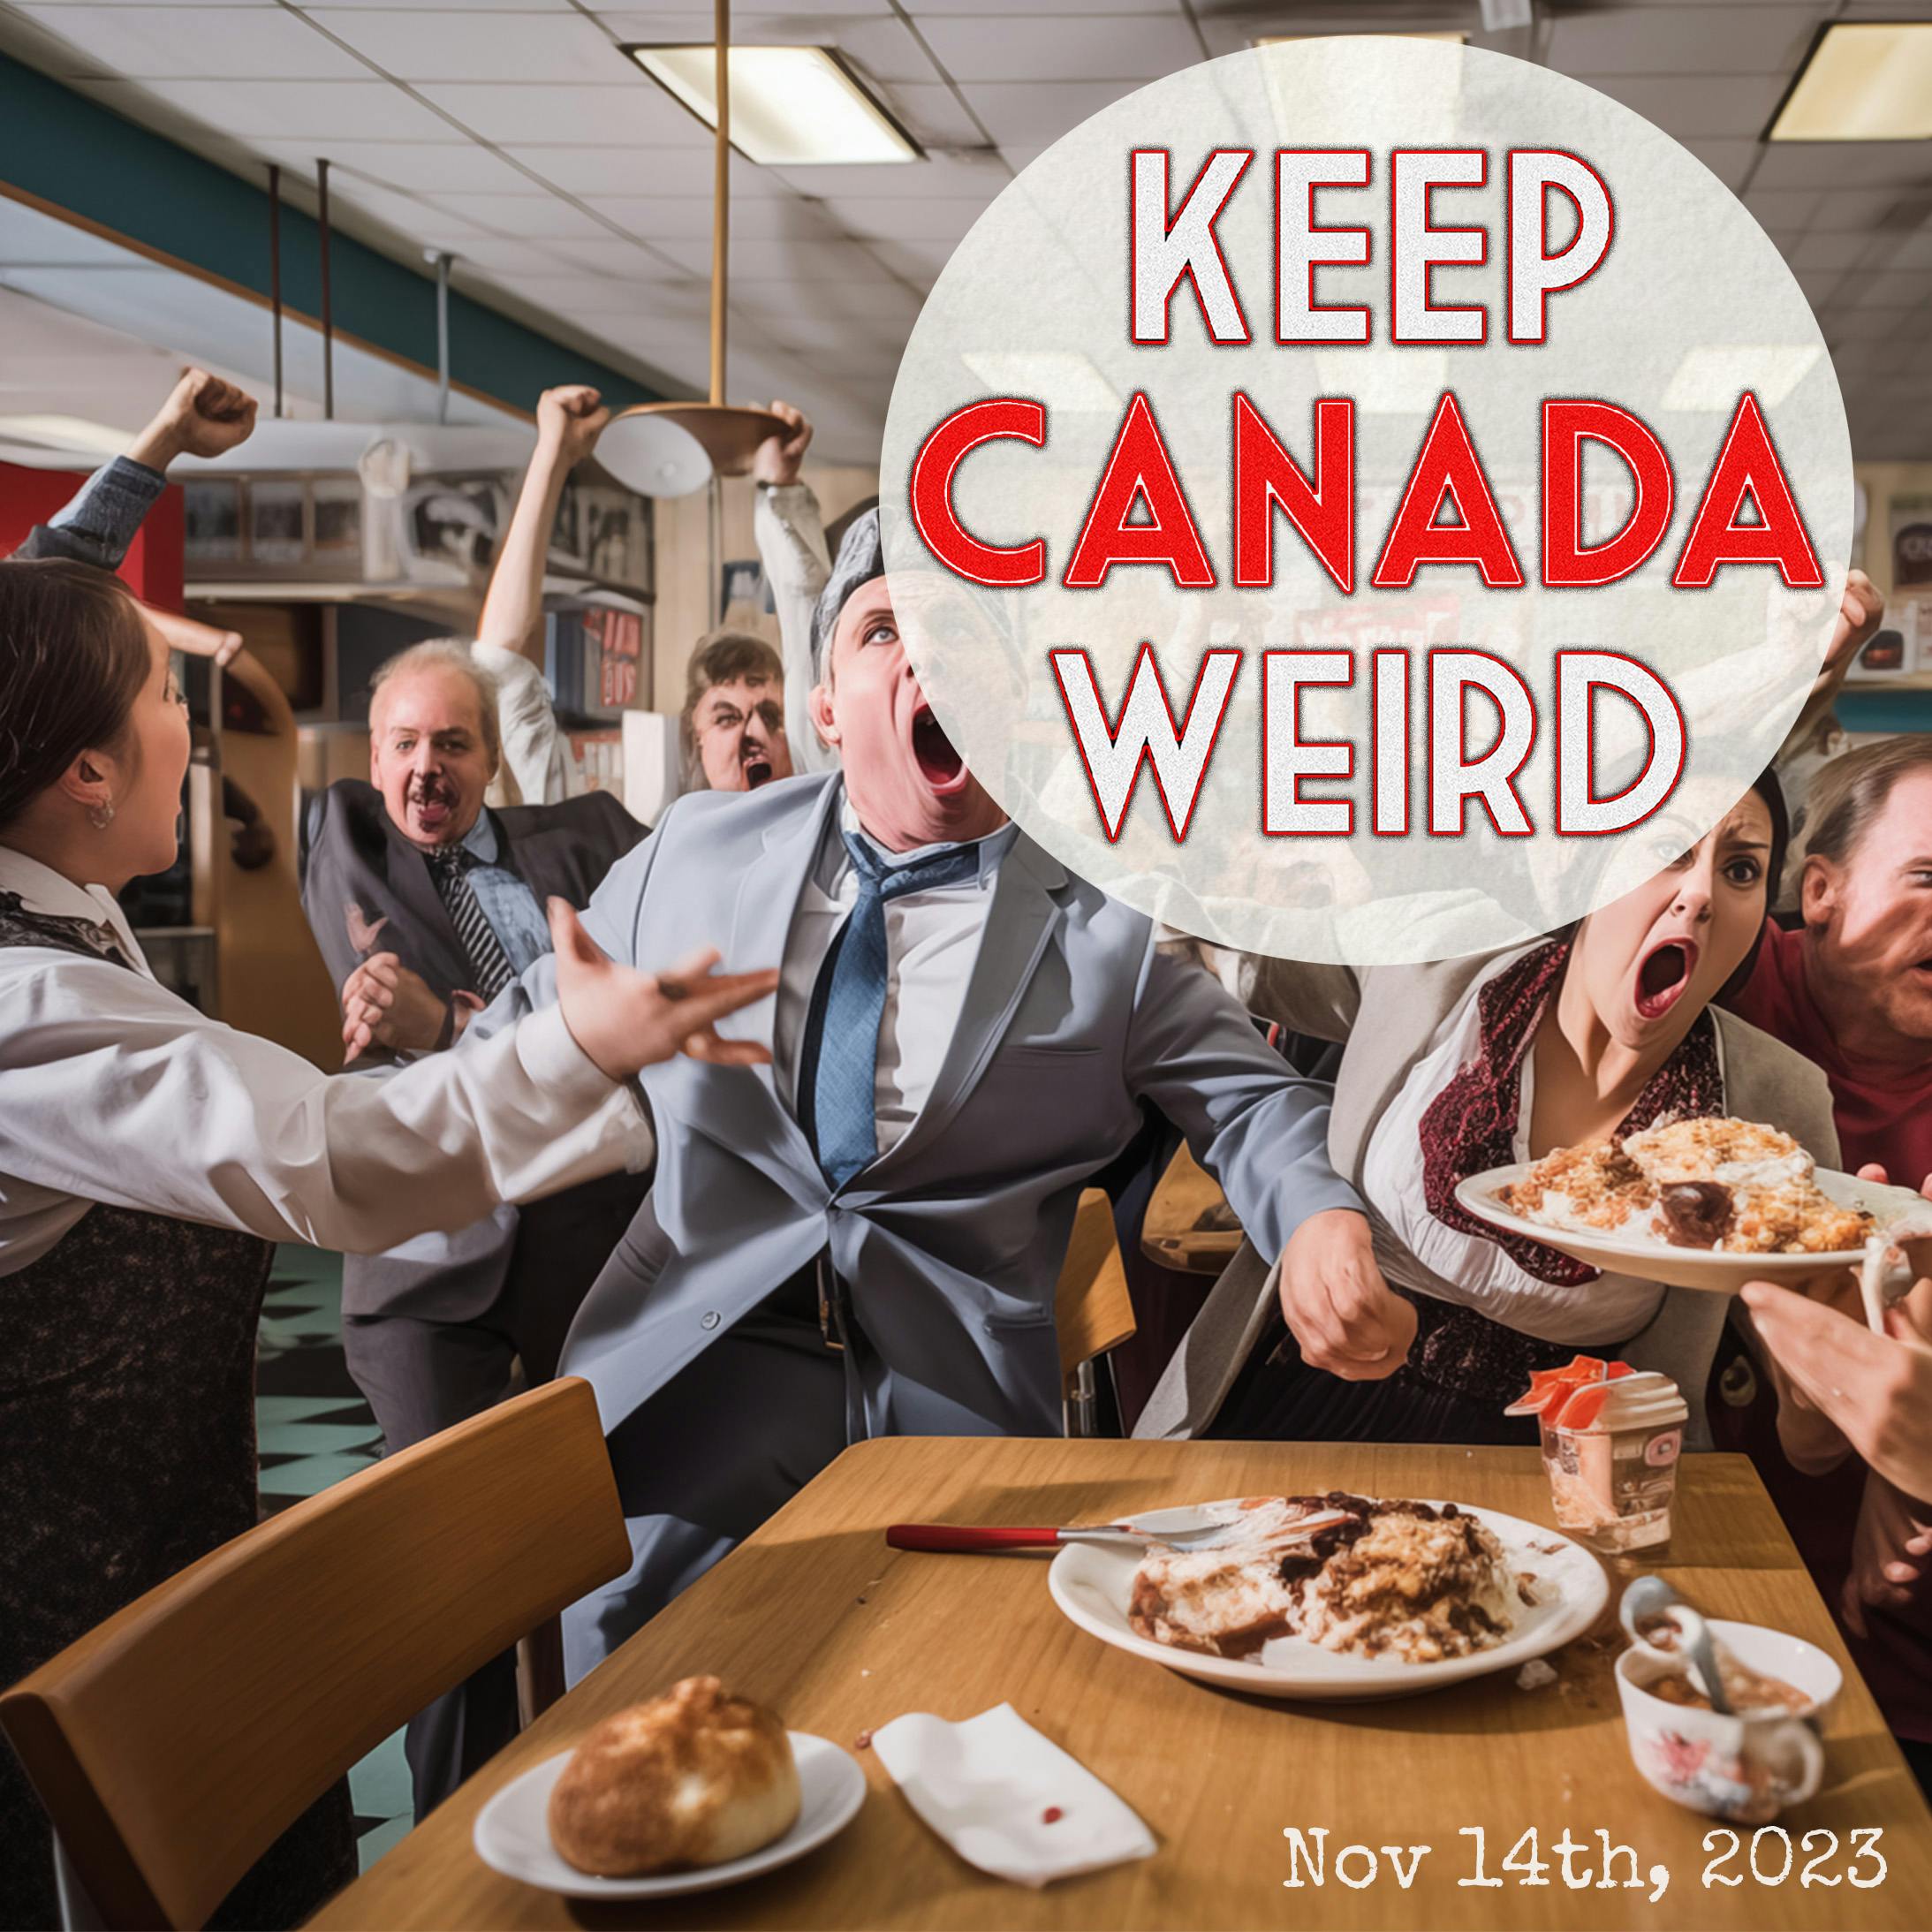 KEEP CANADA WEIRD - Nov 15th, 2023 - the Fredericton pole, Jay's Chicken in Glace Bay, the worst man in Alberta